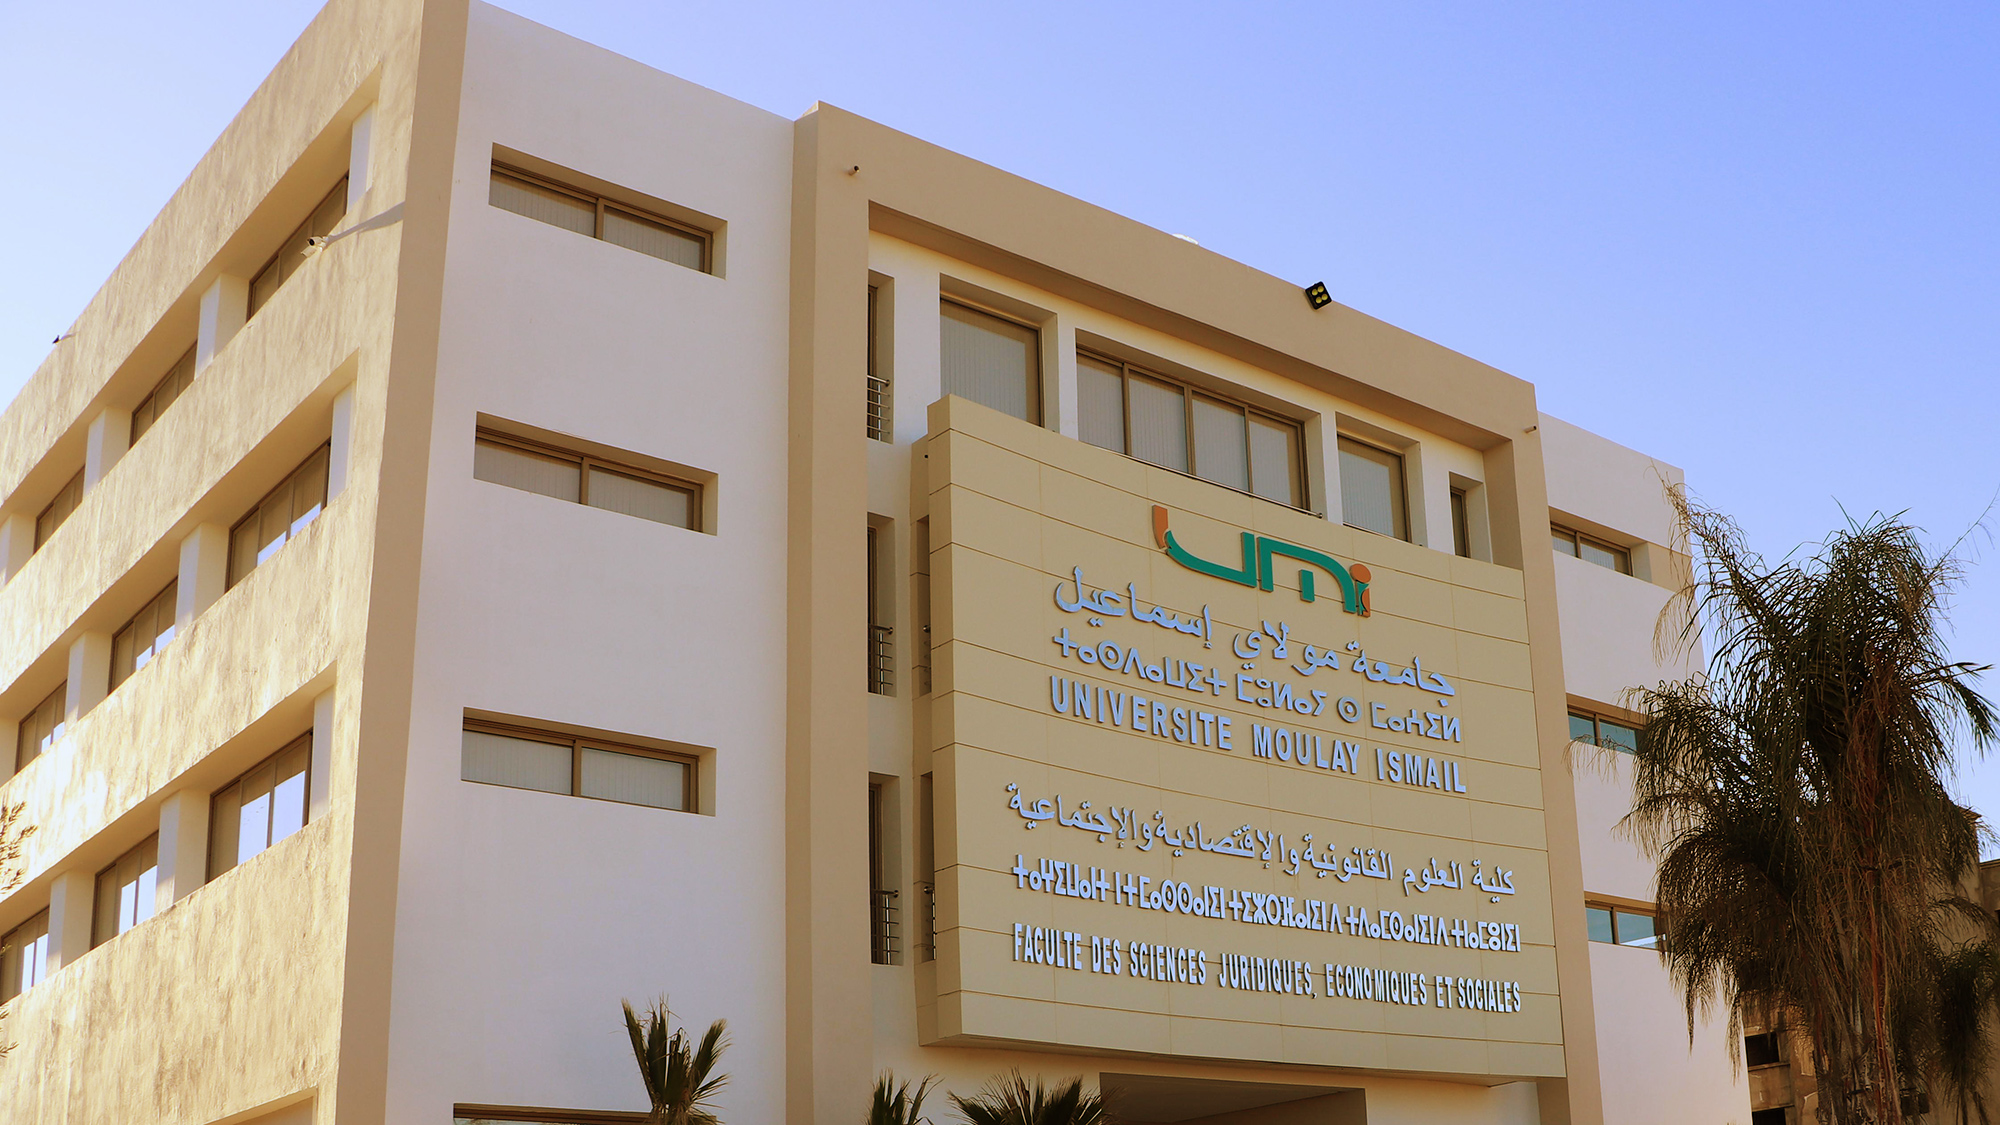 Moulay Ismail University building